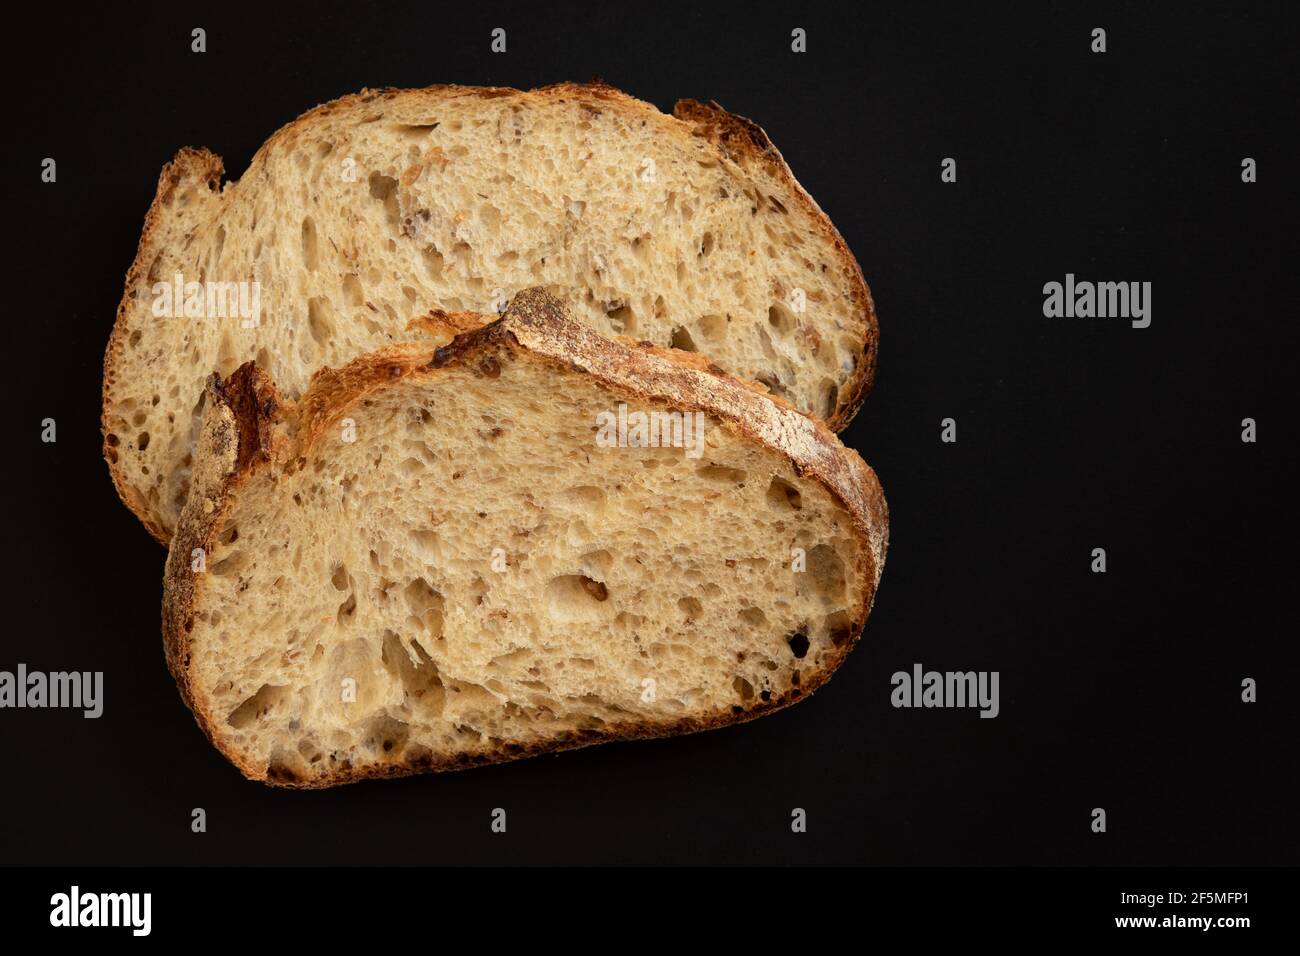 Fresh sliced whole grains bread on a black background. Two slices of sliced bread. View from above. Stock Photo